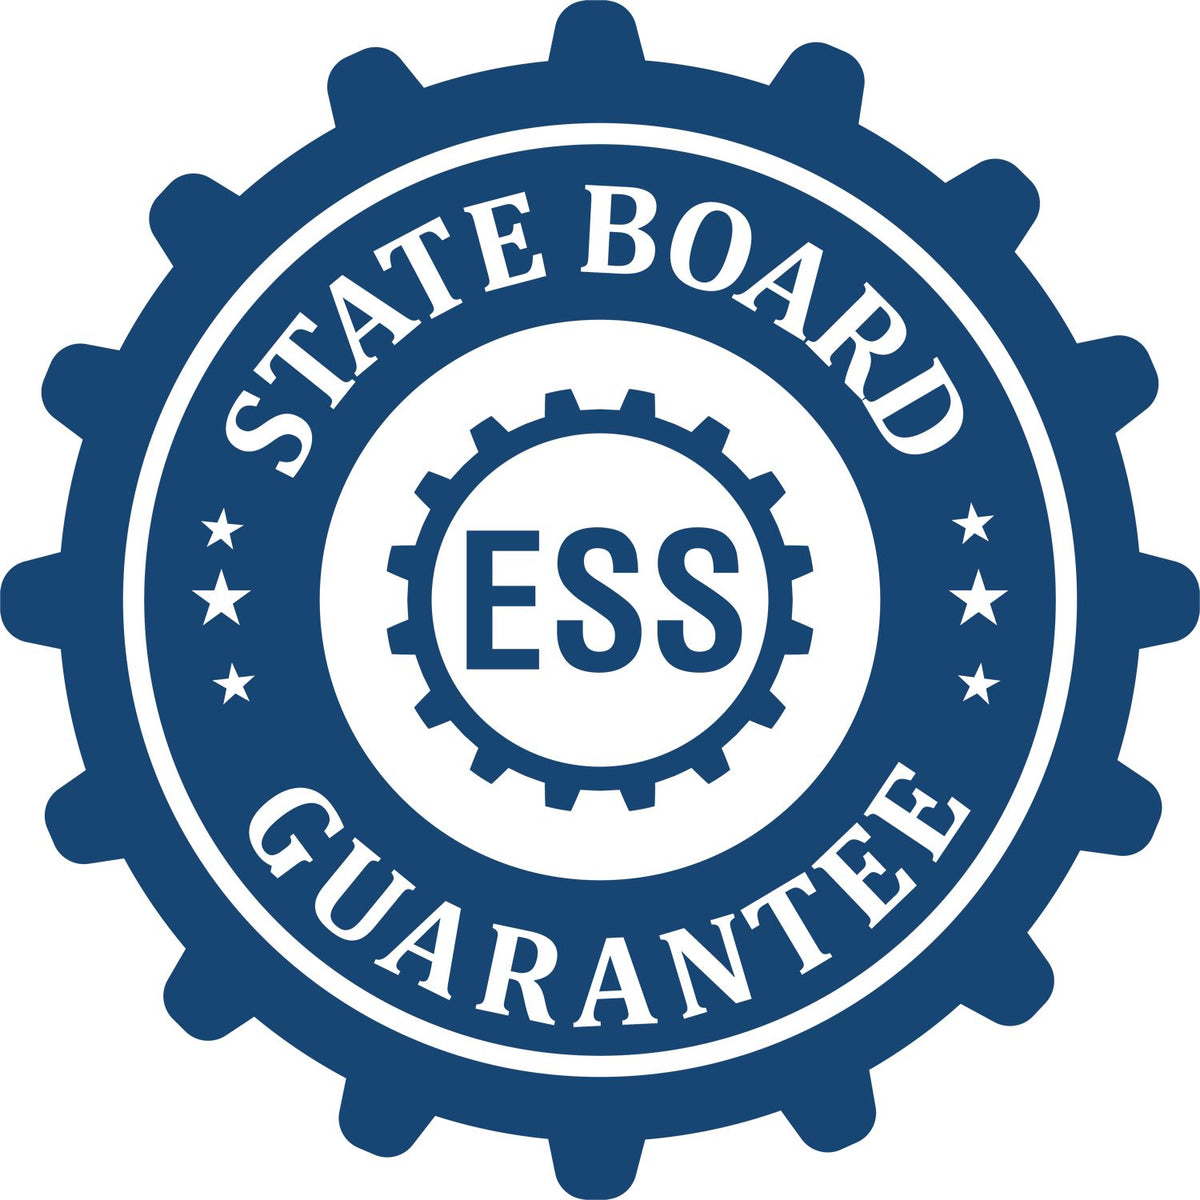 An emblem in a gear shape illustrating a state board guarantee for the Premium MaxLight Pre-Inked Massachusetts Engineering Stamp product.